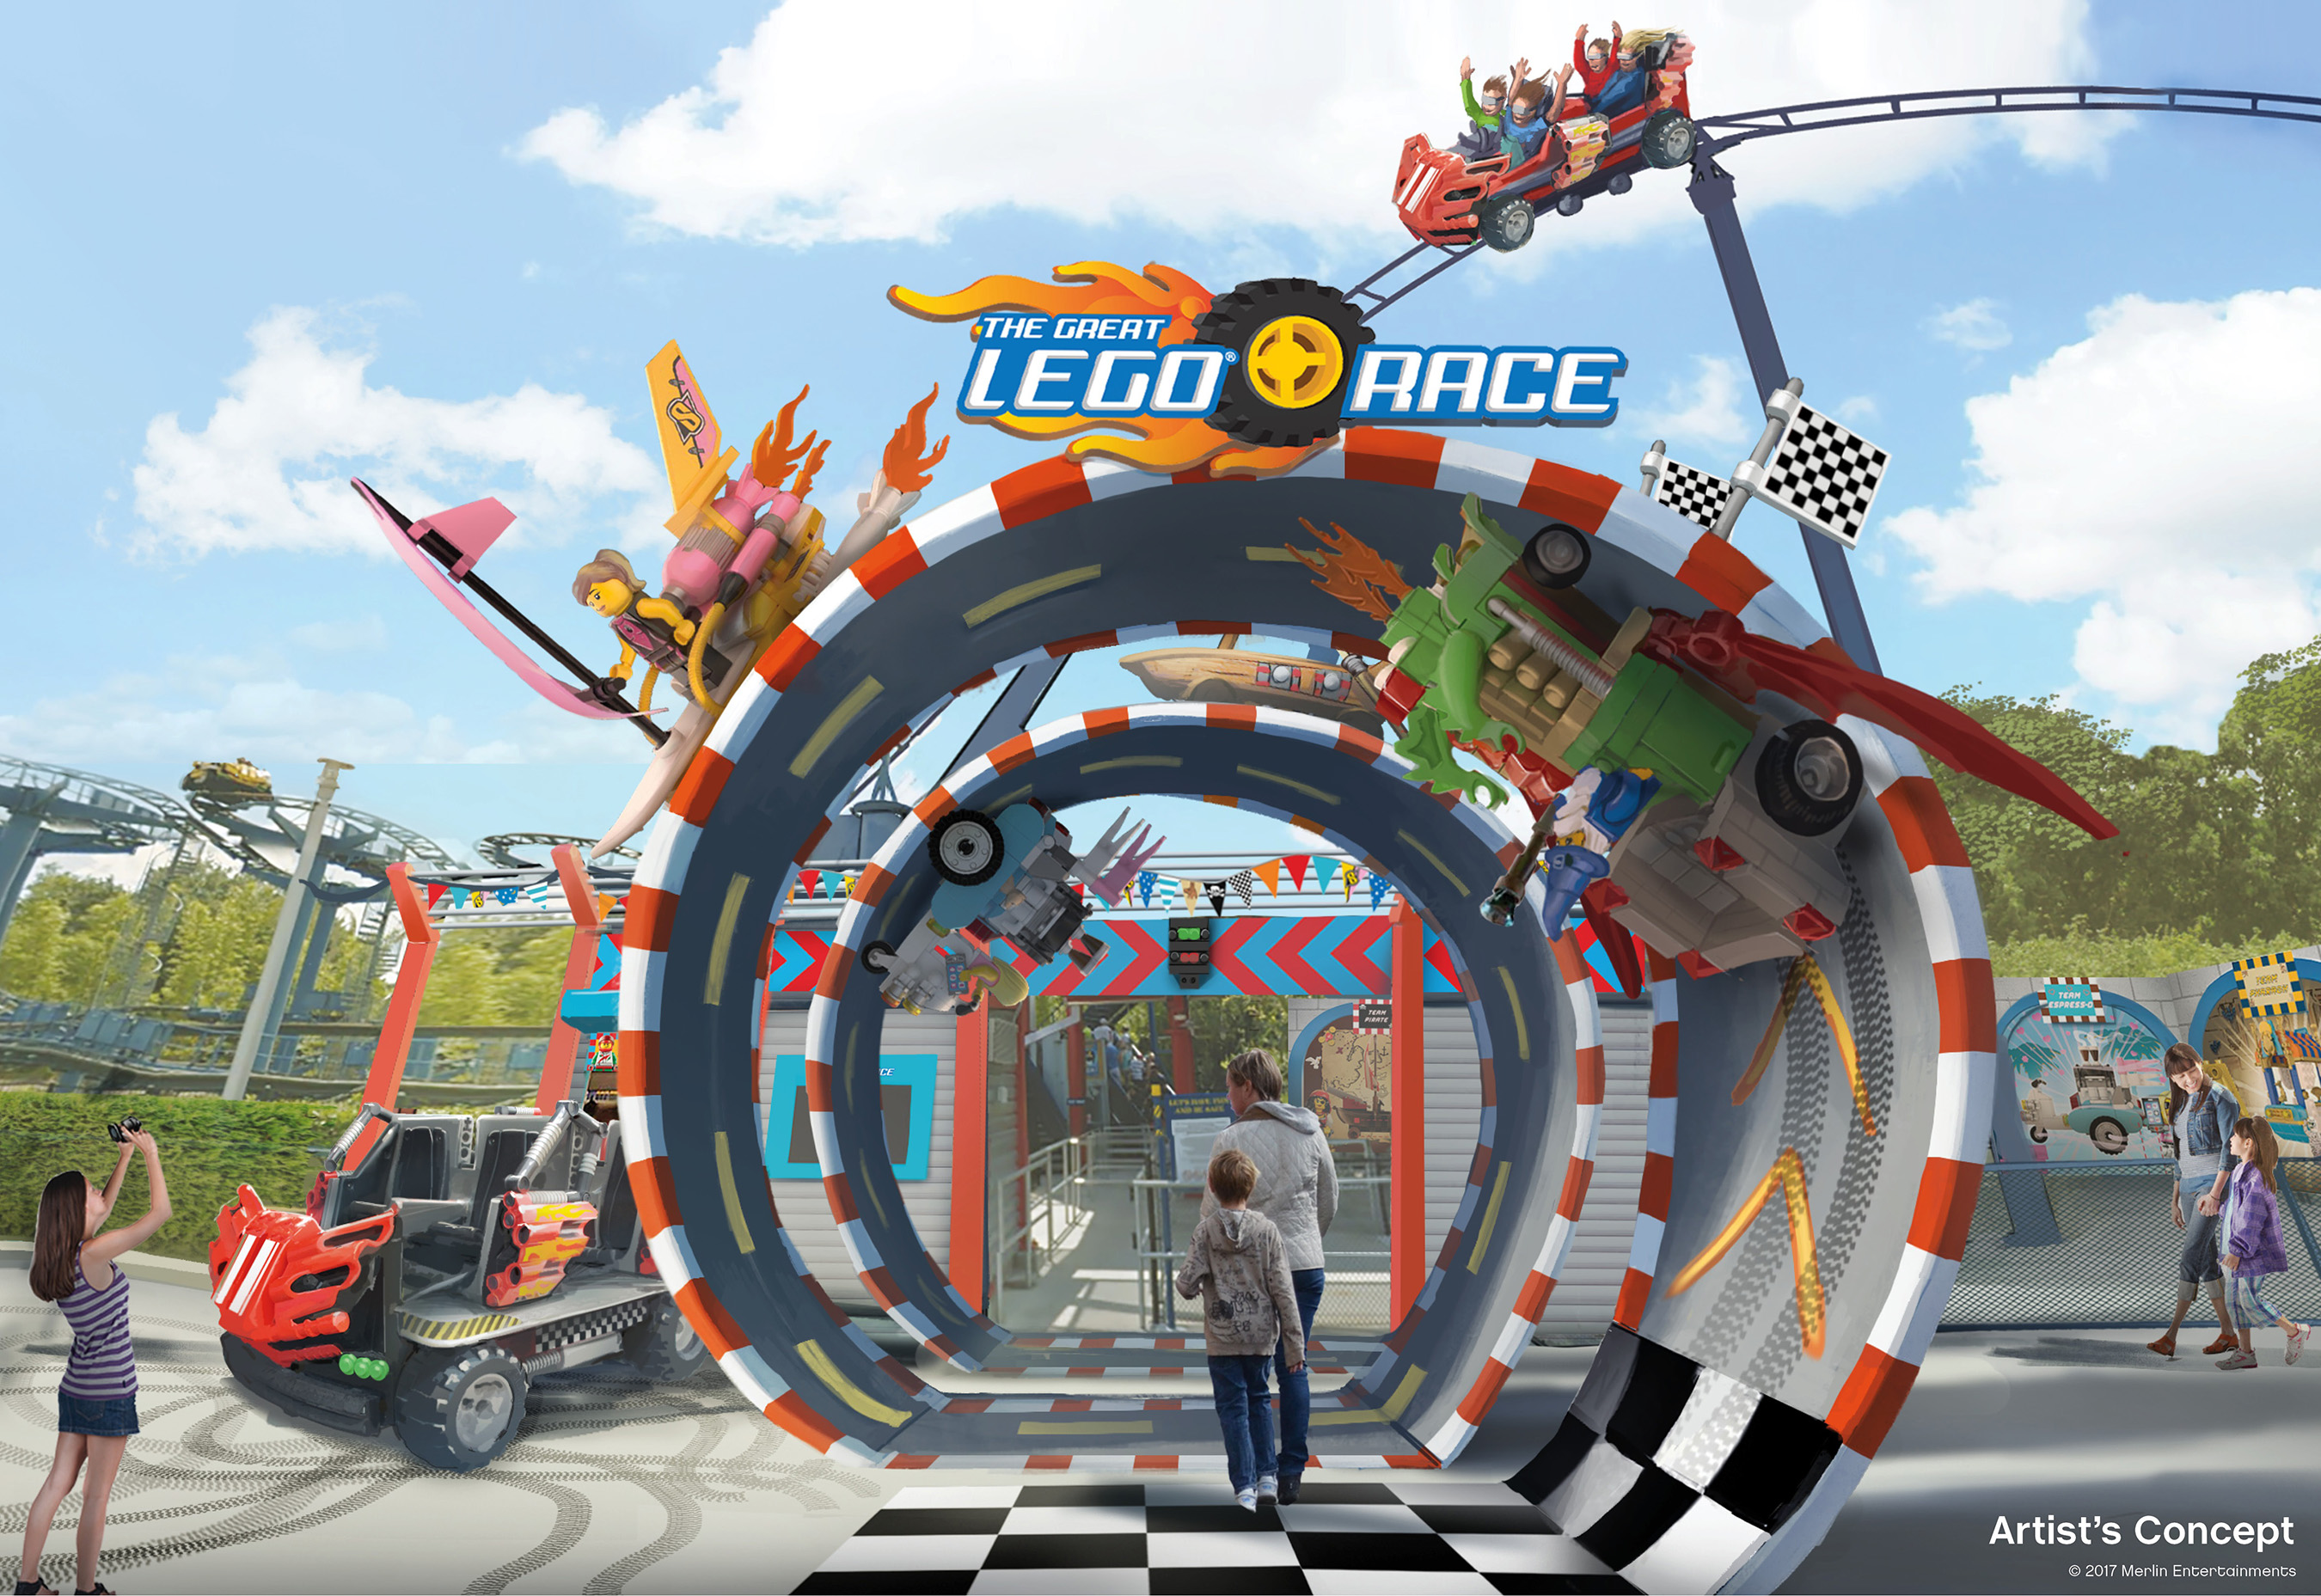 The Great Lego Race VR Coaster at LEGOLAND Florida Resort will be the first virtual reality coaster designed for kids.